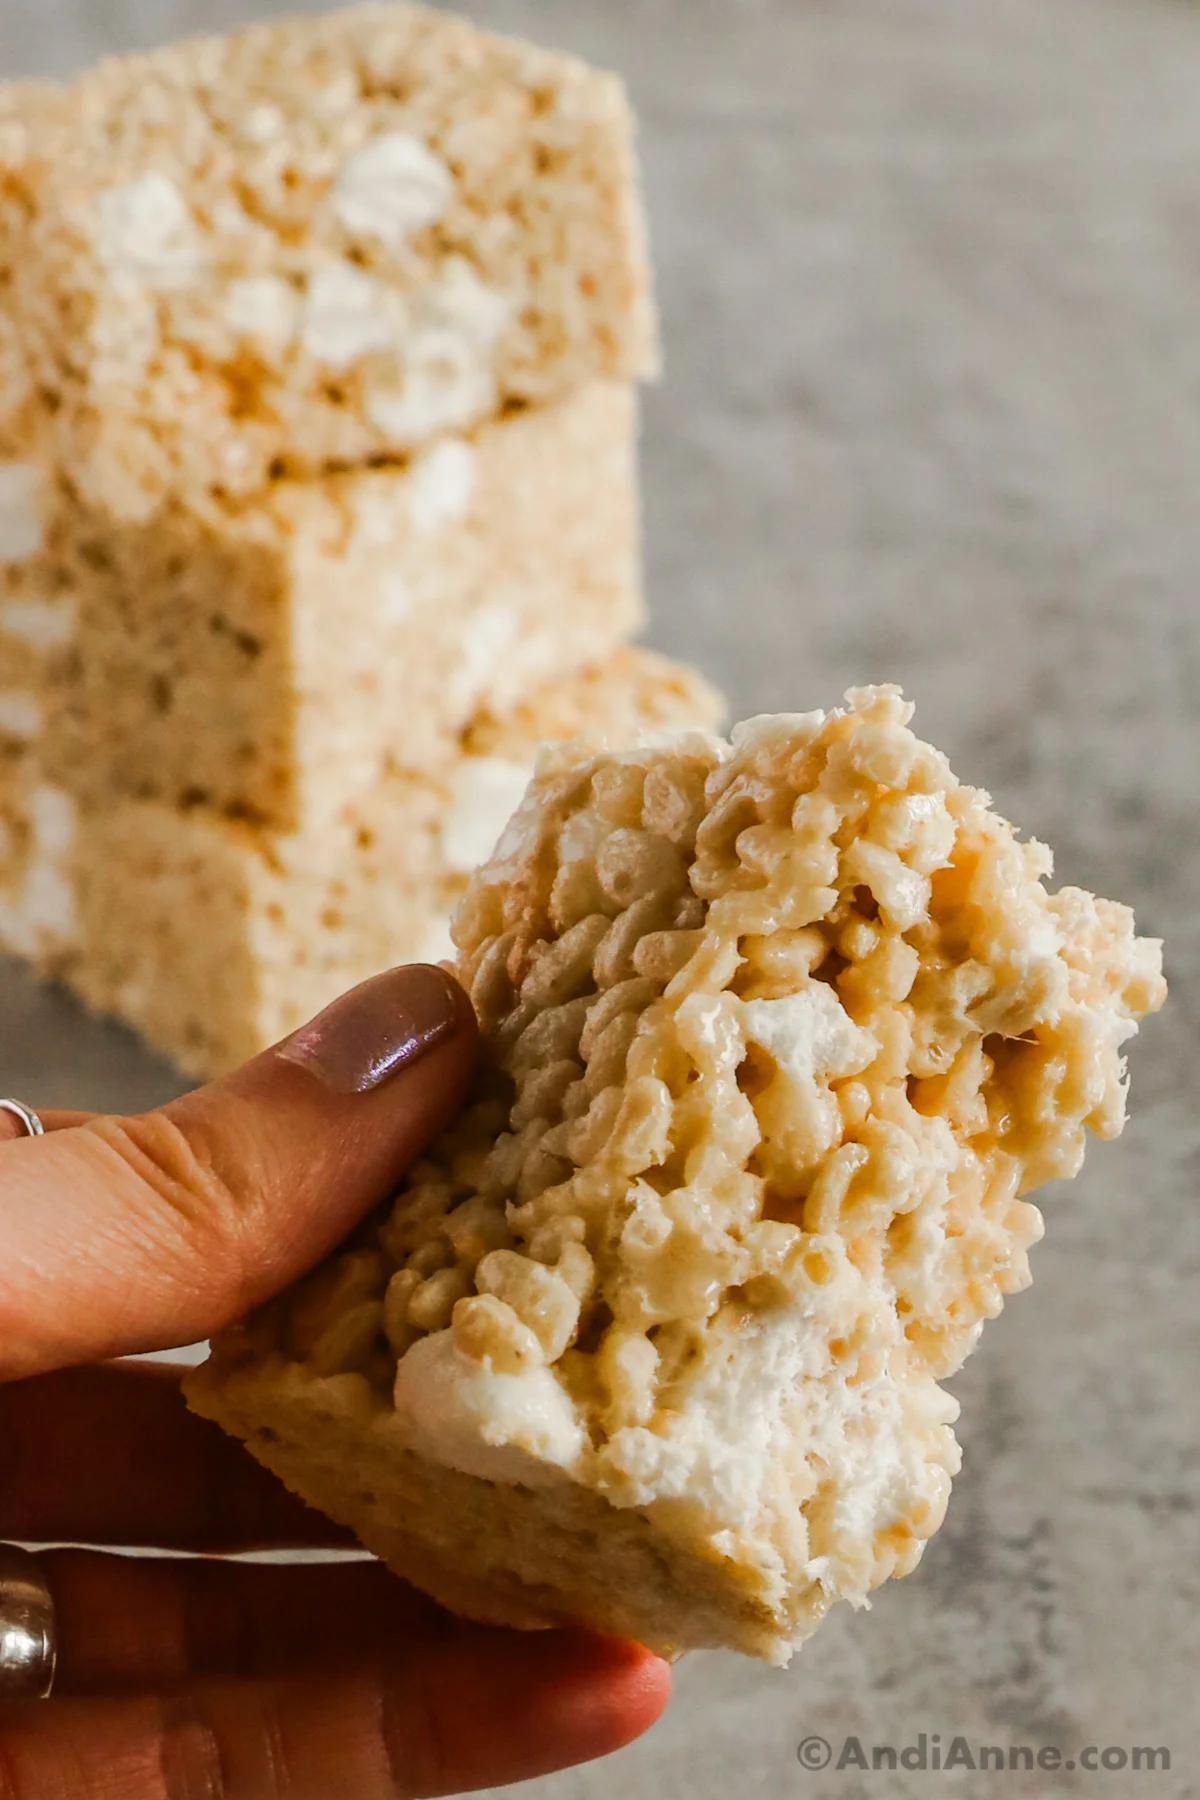 A hand holding half of a rice krispie treat.